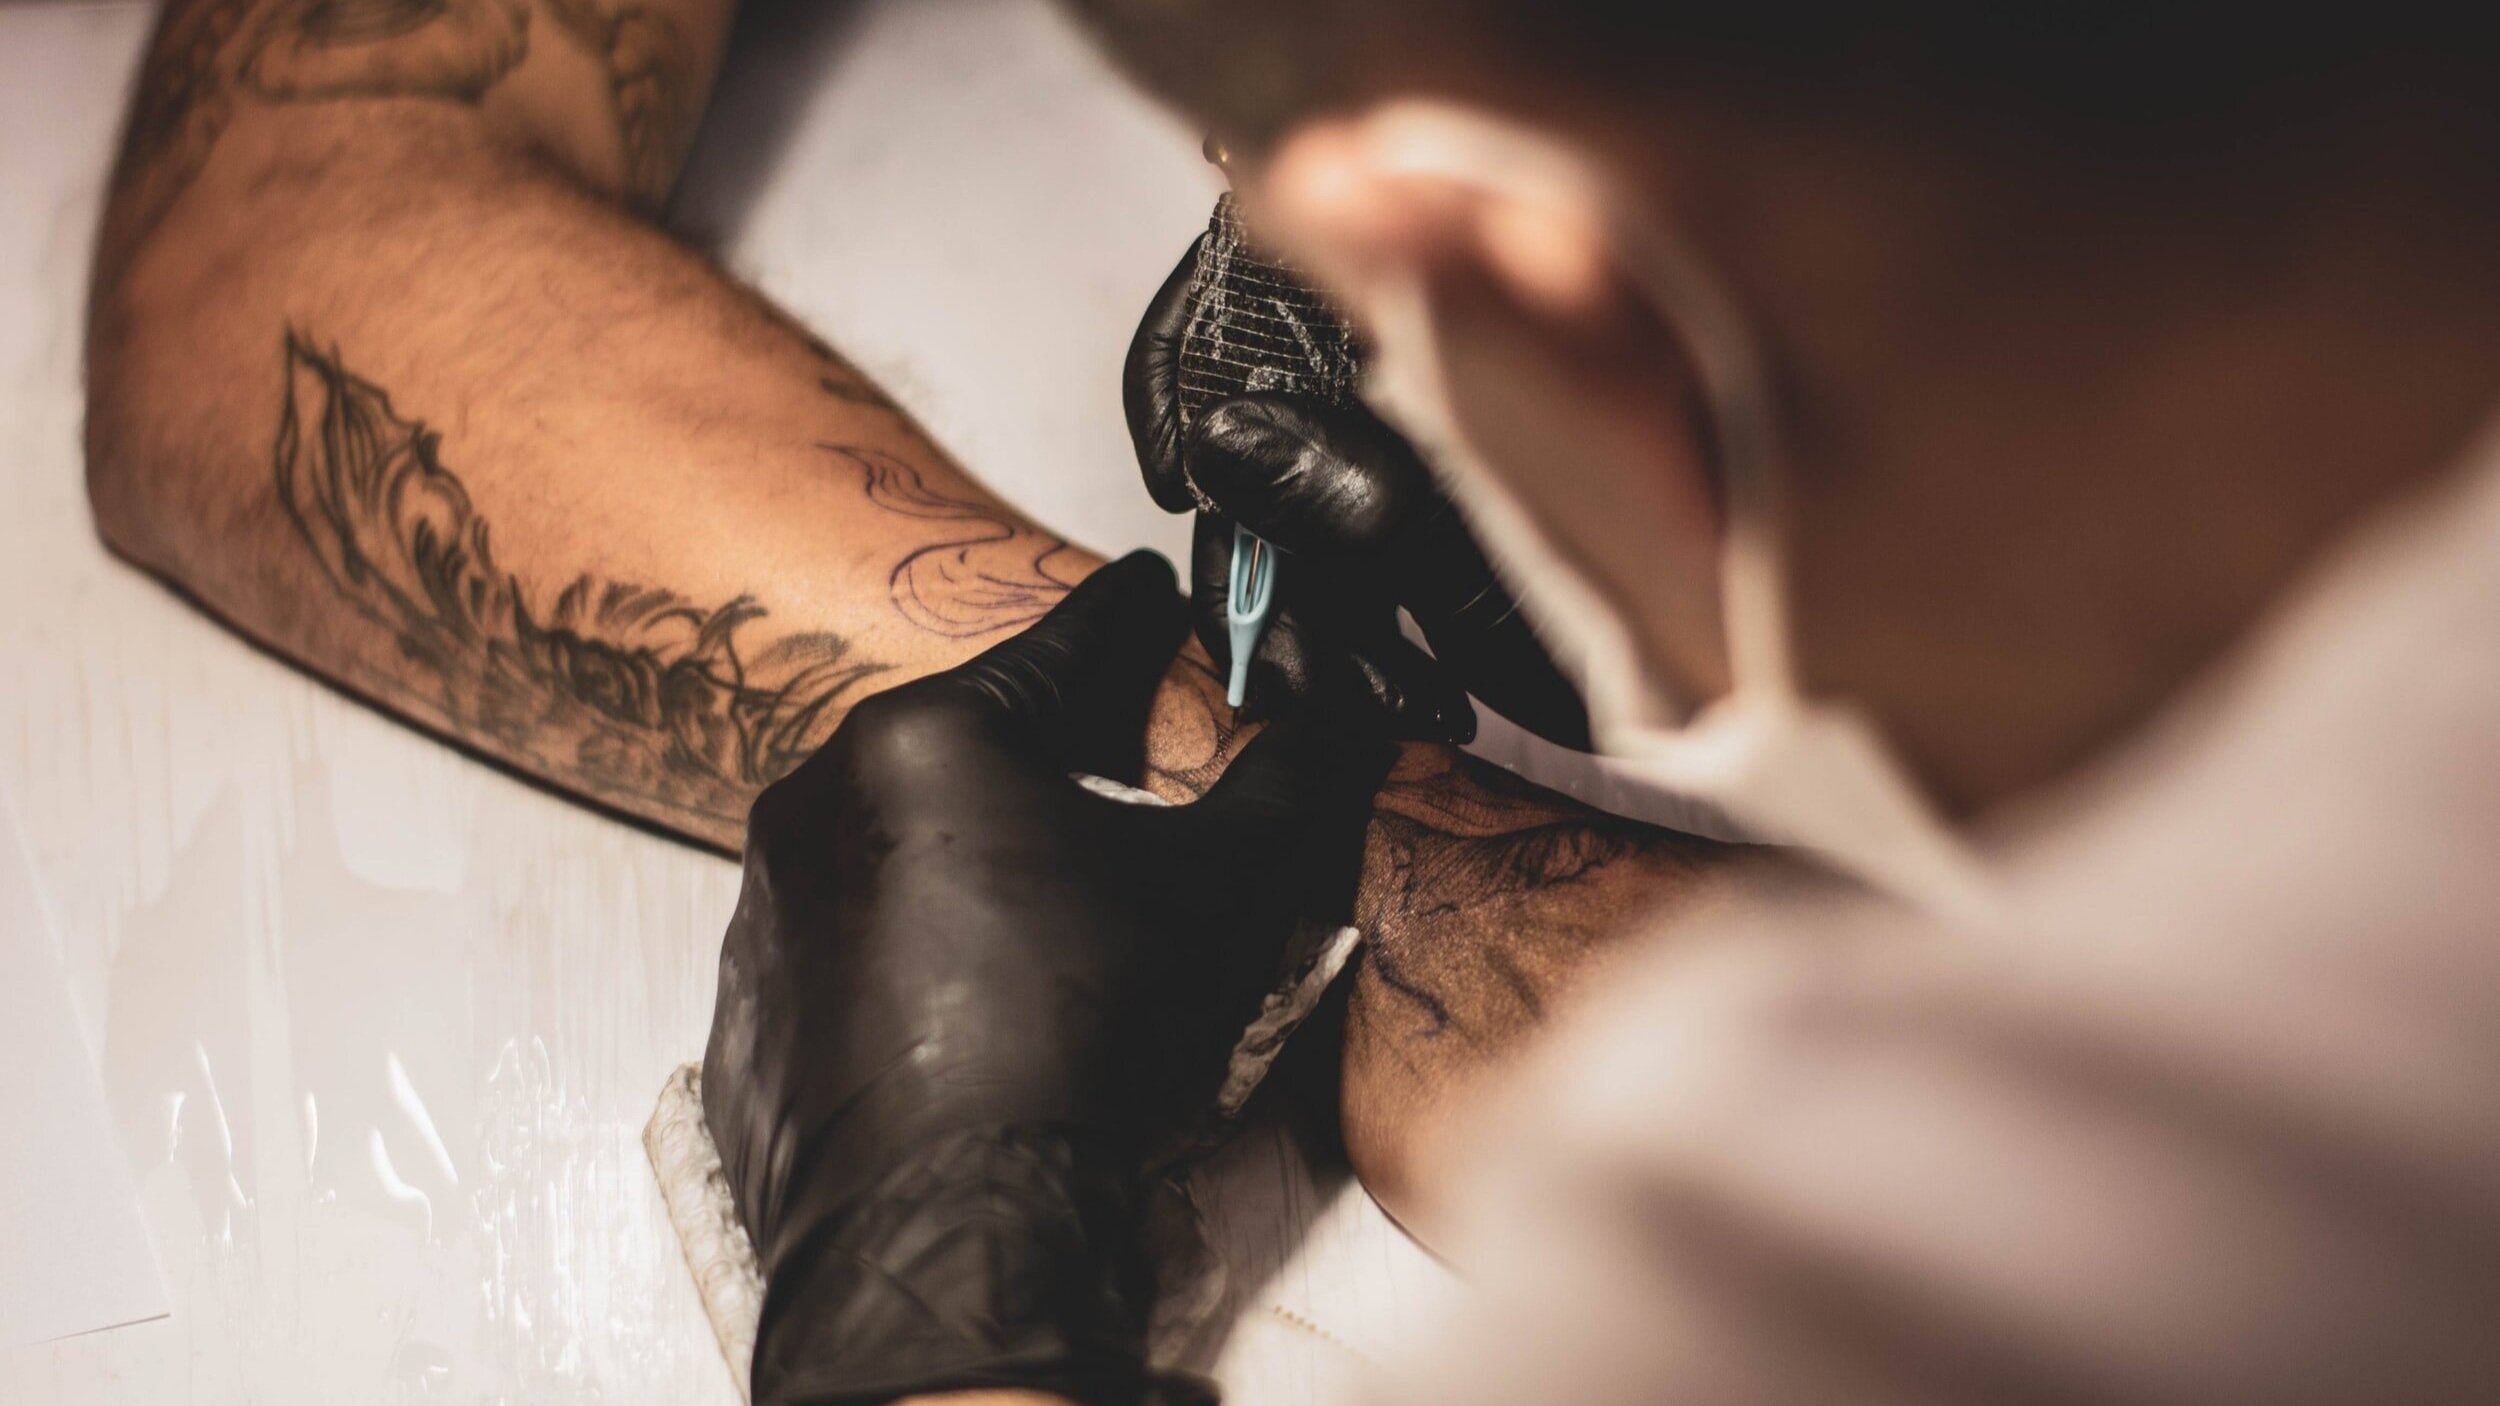 Will A Sleeve Tattoo Stretch? Check With Me Before Getting It – InkArtByKate